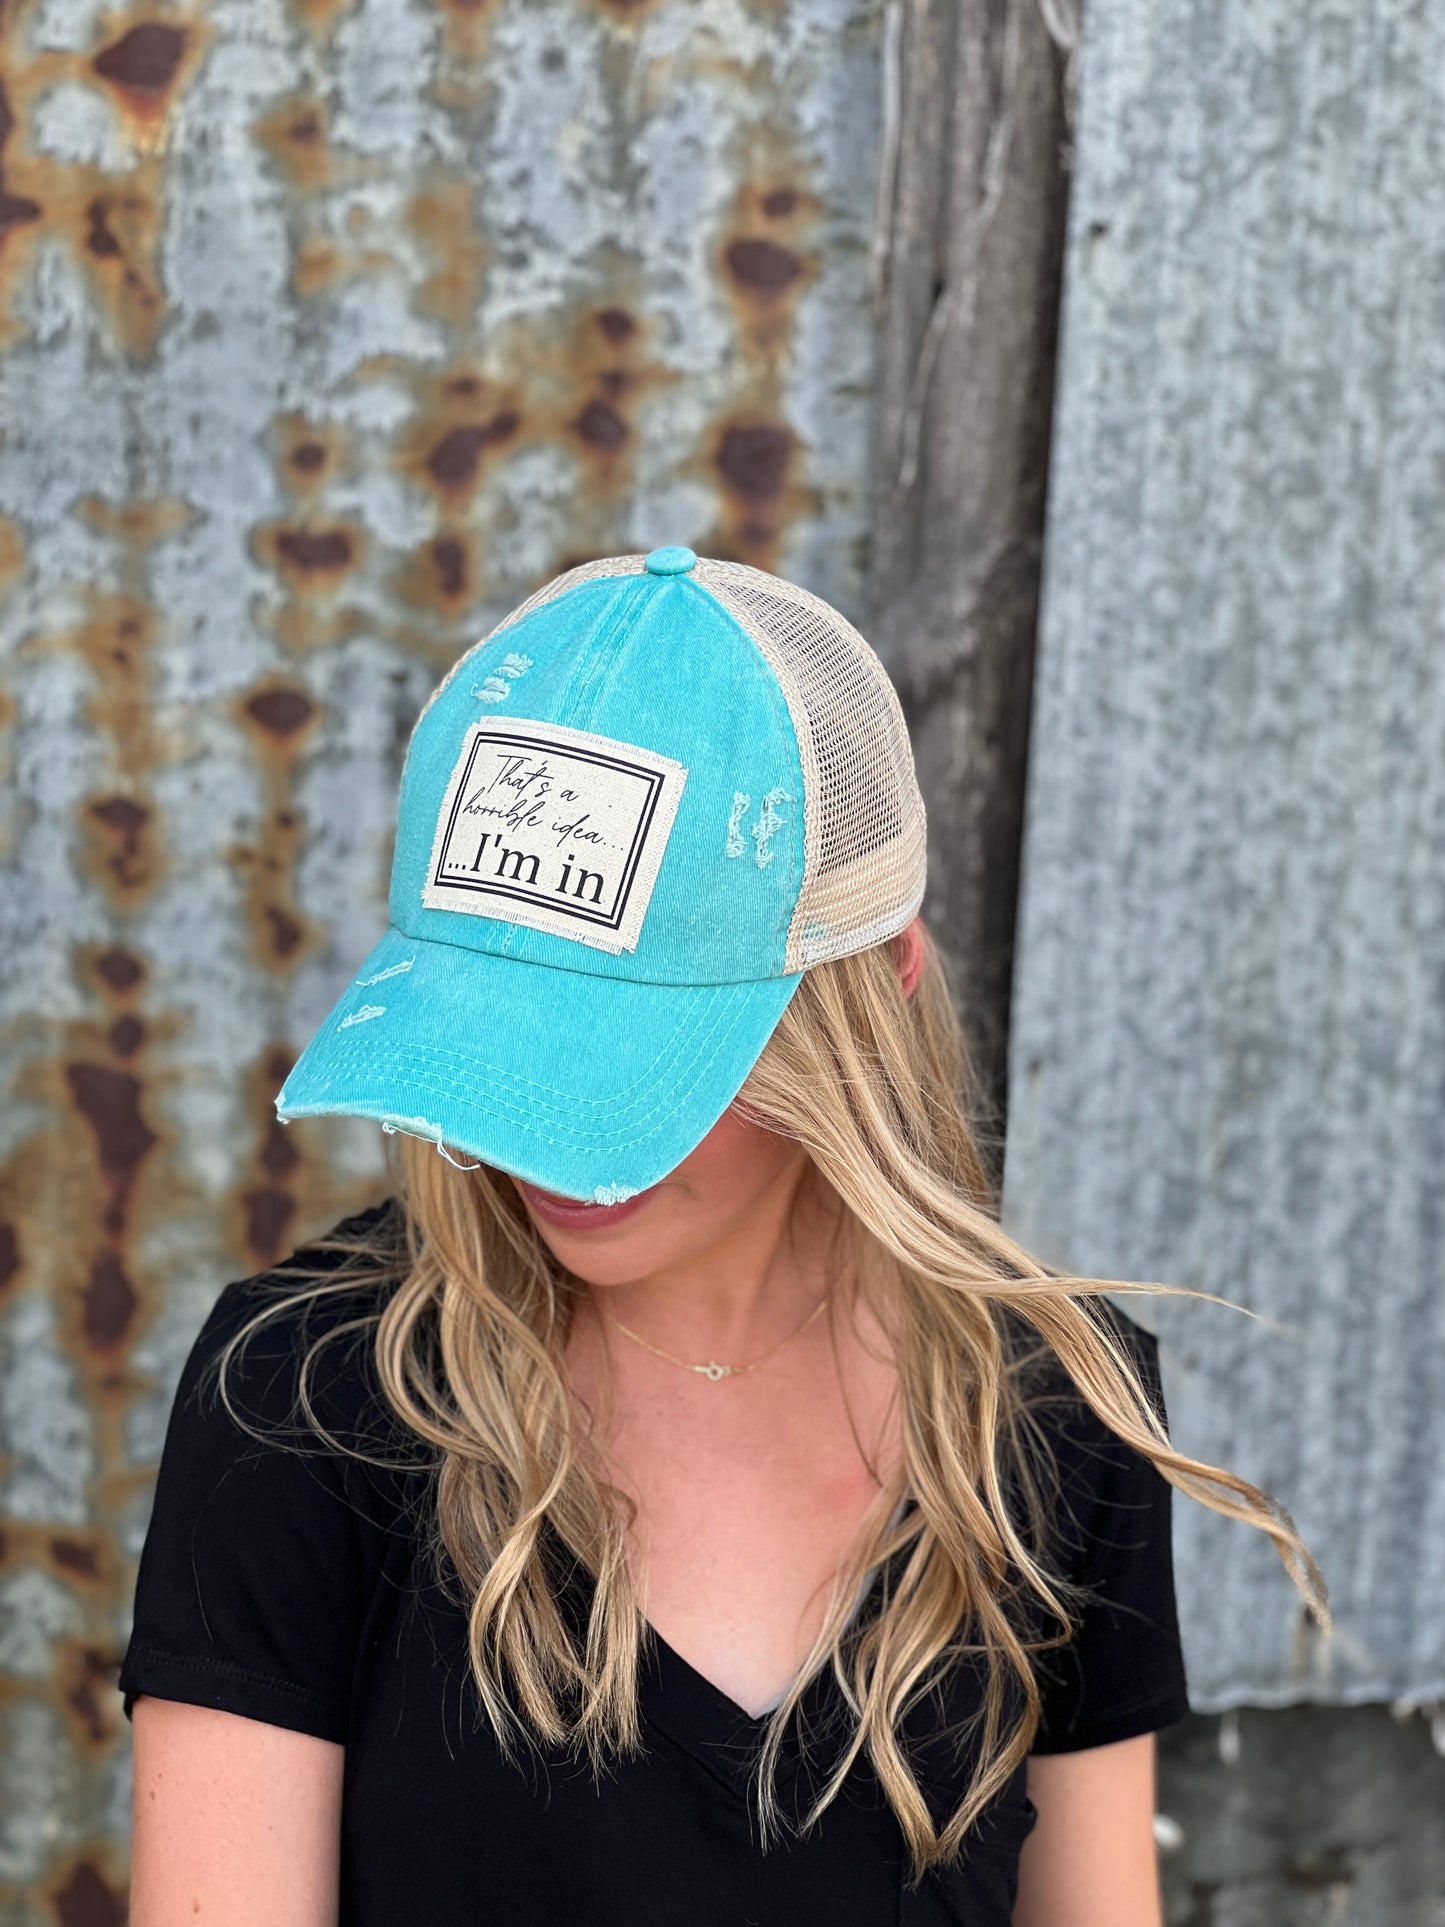 Thats a Horrible Idea... IM IN Teal Distressed Baseball Cap